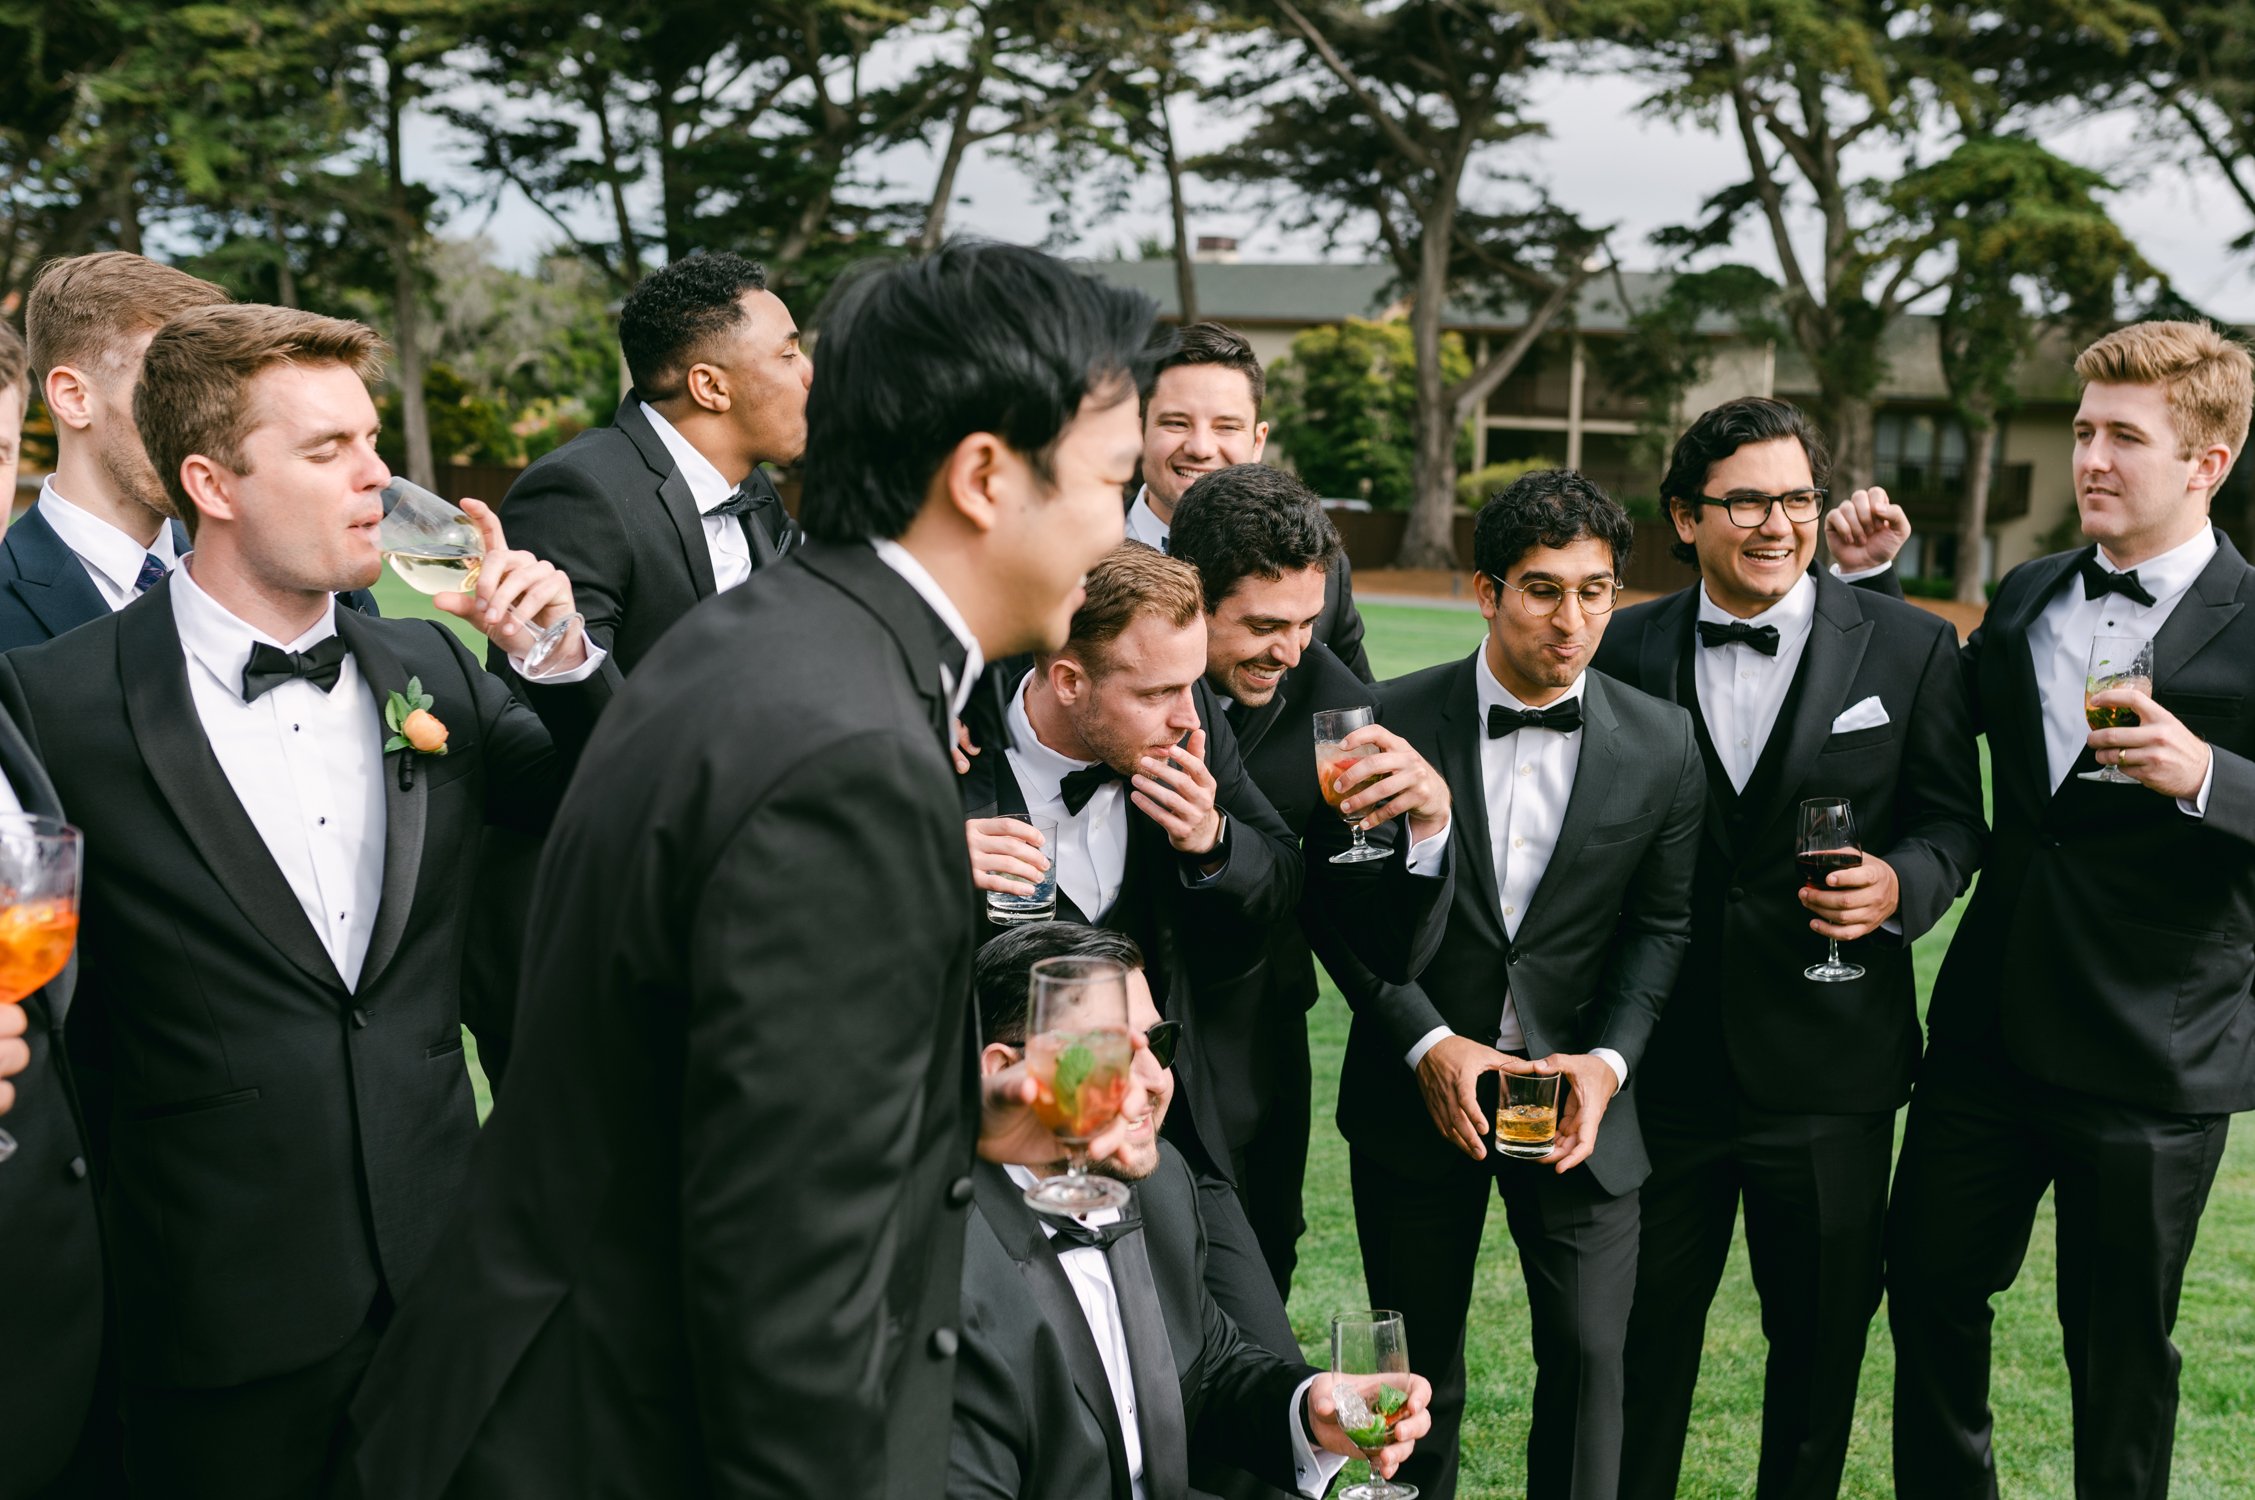 pebble beach resort wedding photo of guests during cocktail hour